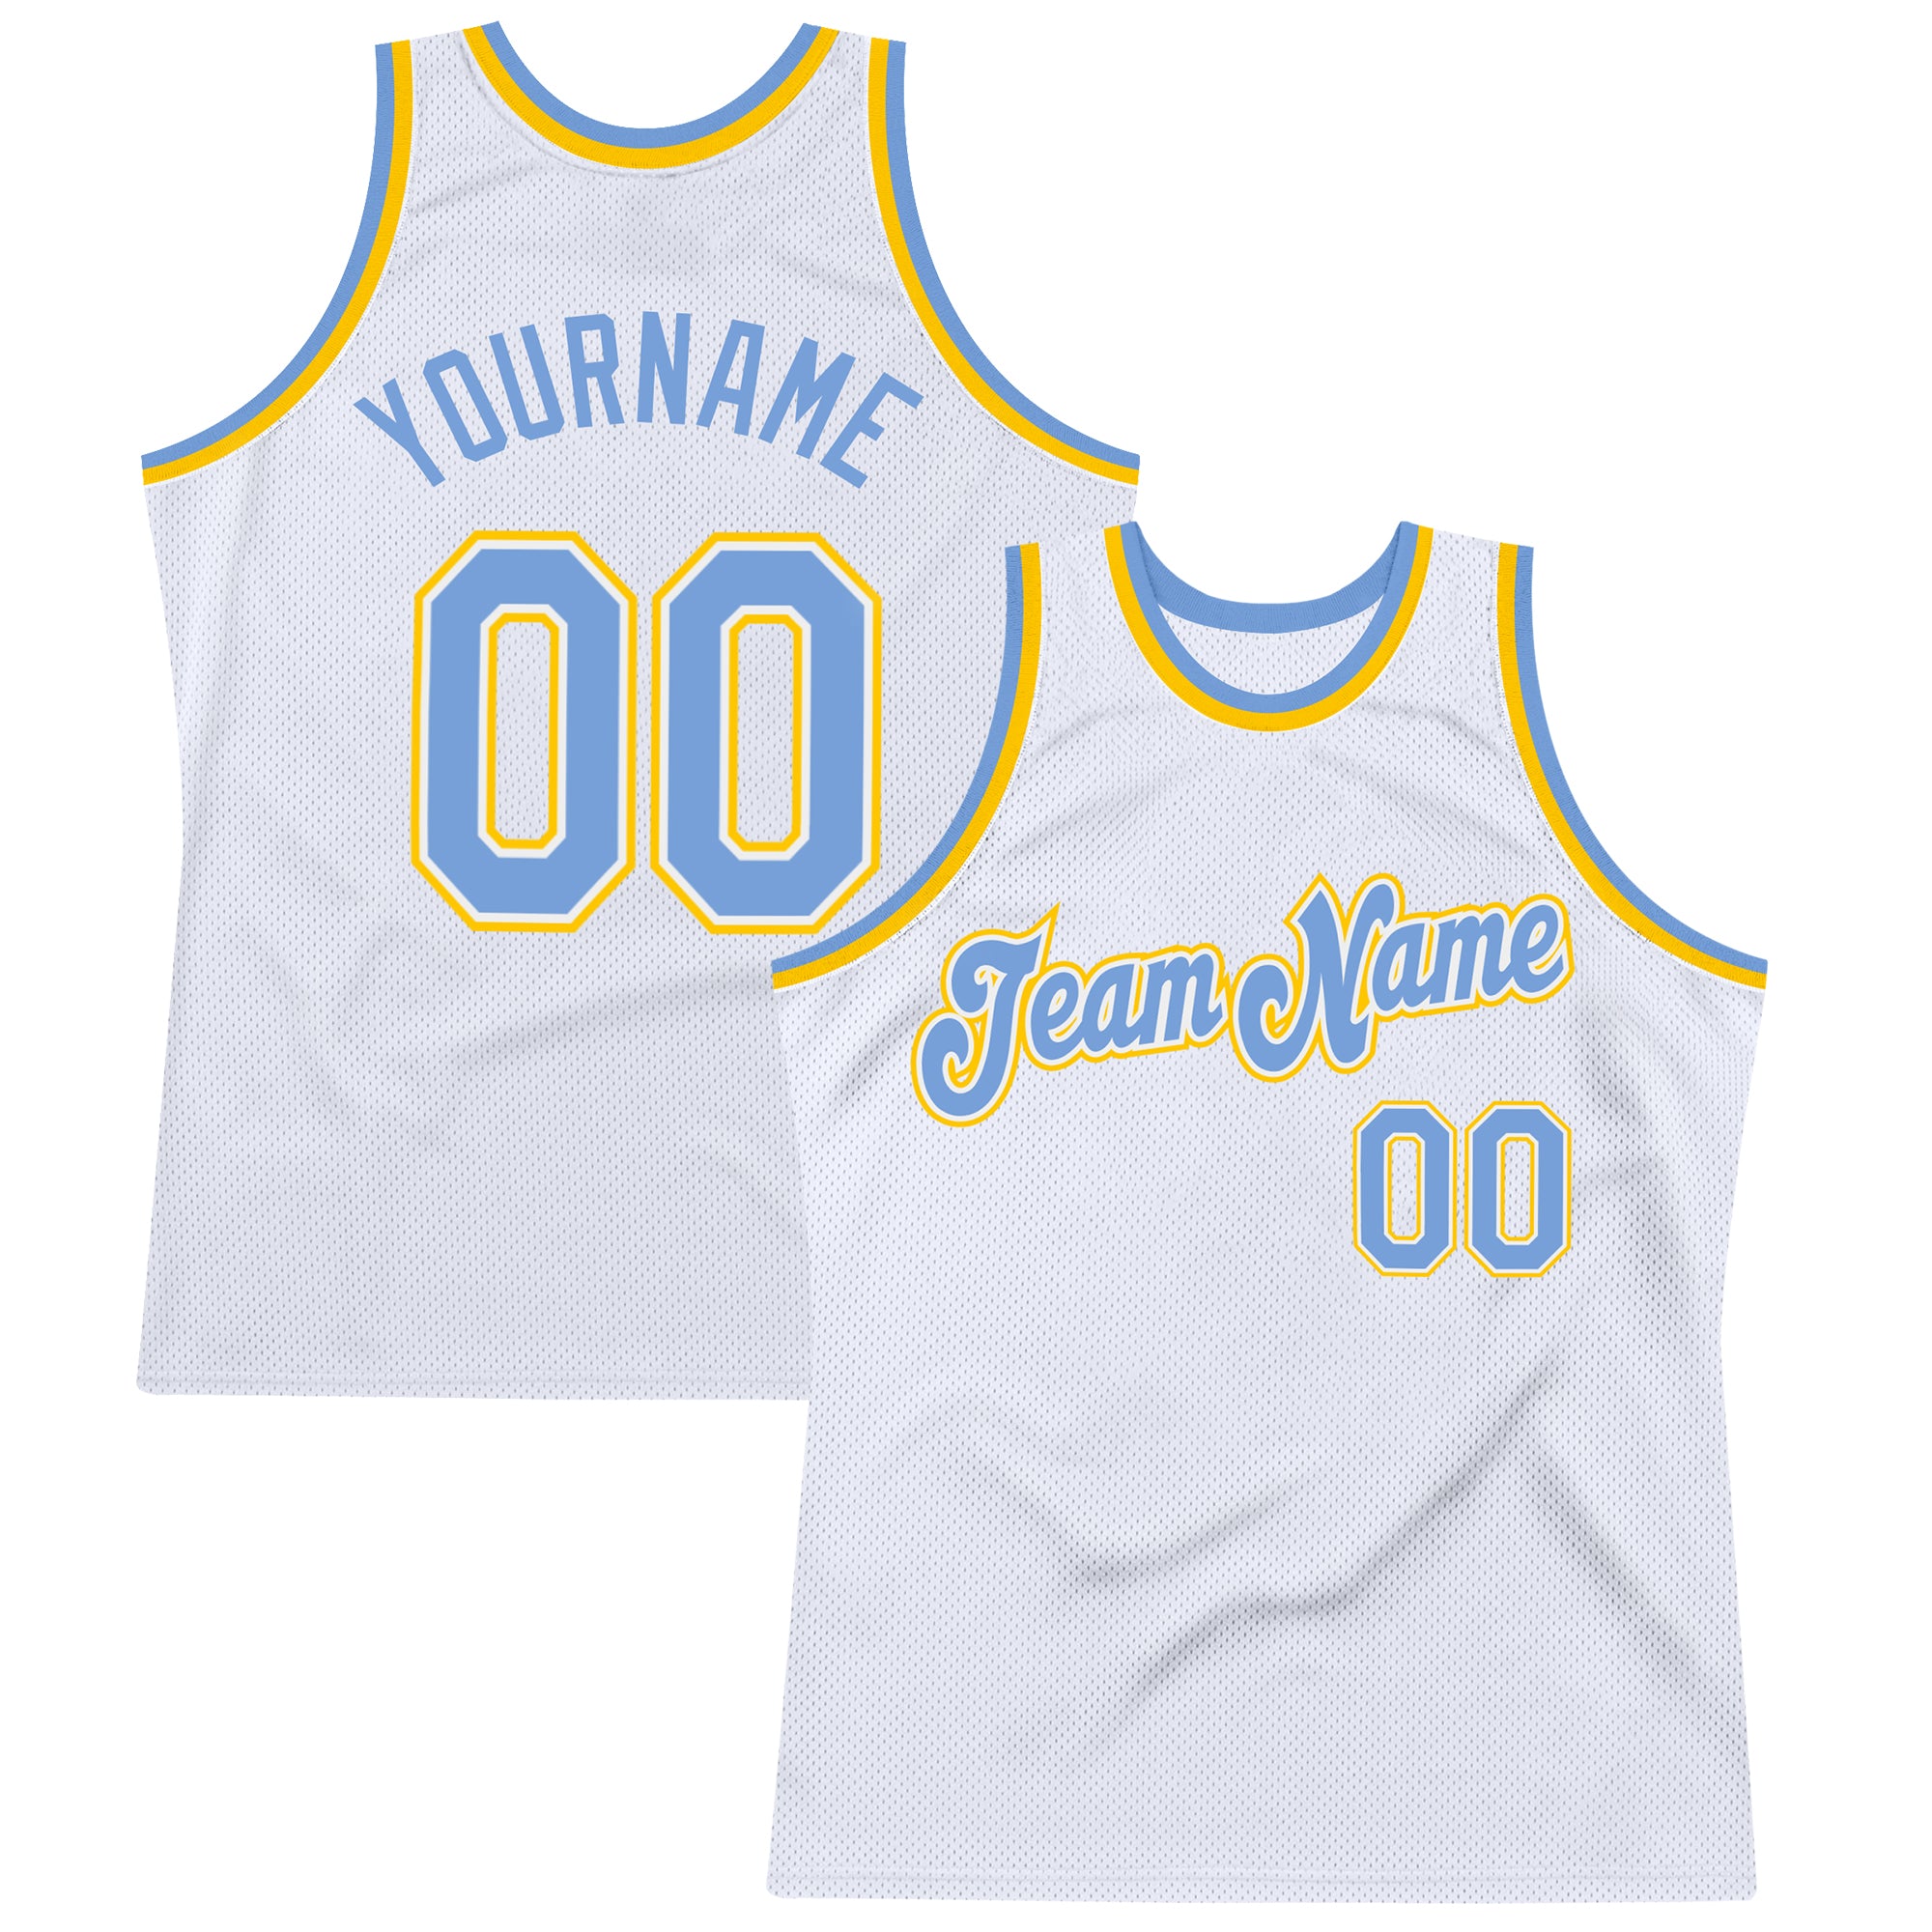 Custom White Kelly Green-Old Gold Authentic Throwback Basketball Jersey